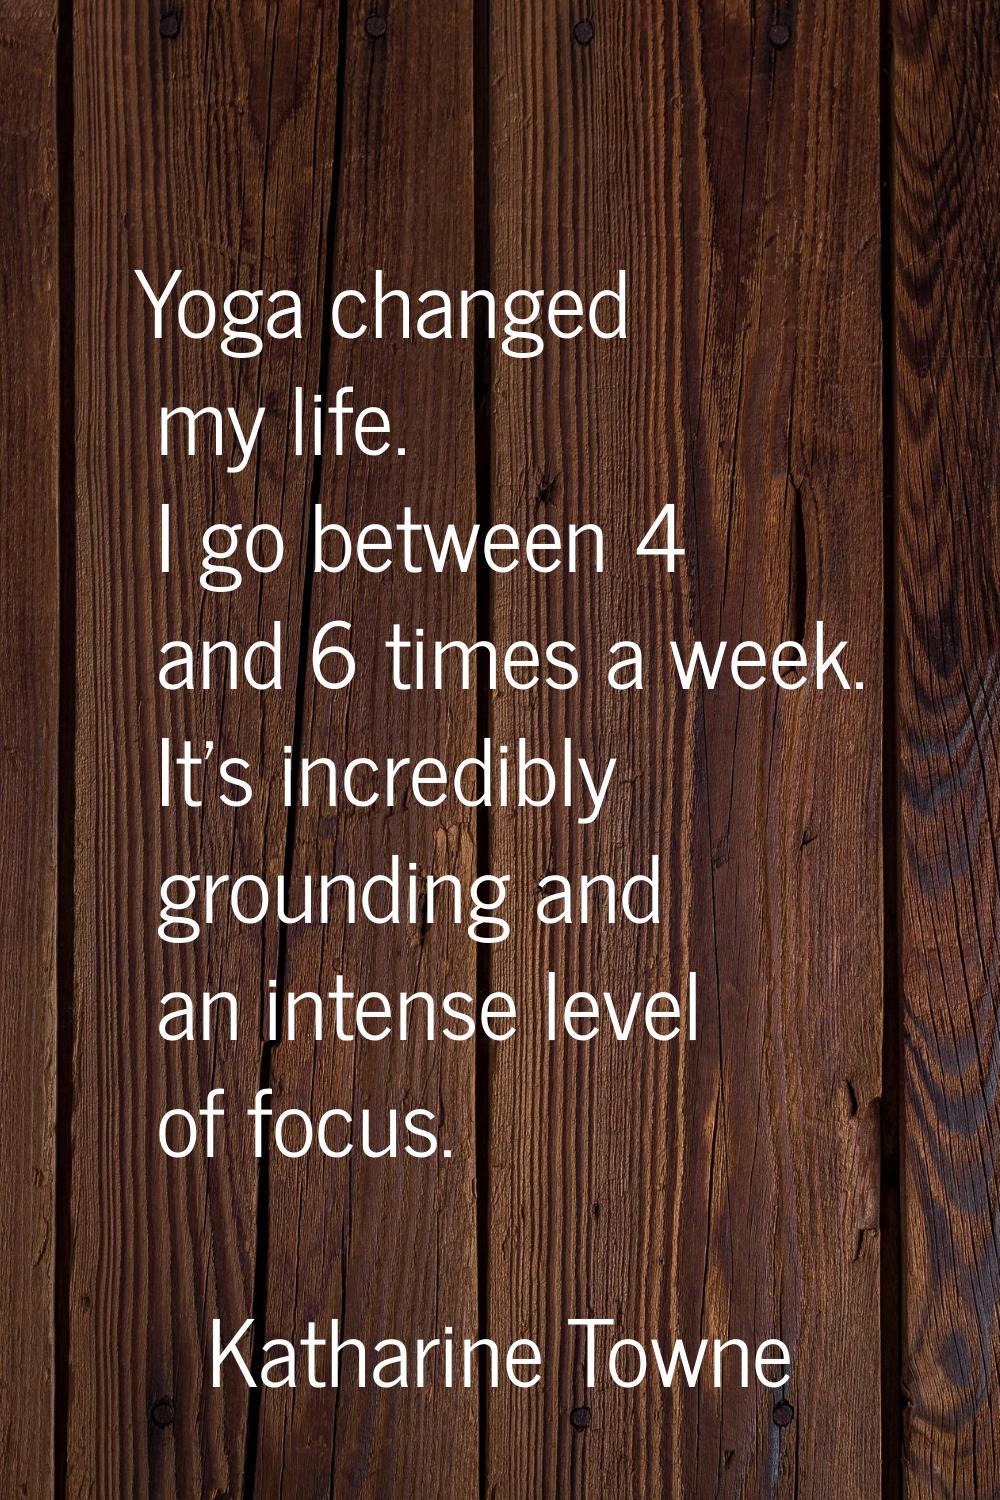 Yoga changed my life. I go between 4 and 6 times a week. It's incredibly grounding and an intense l